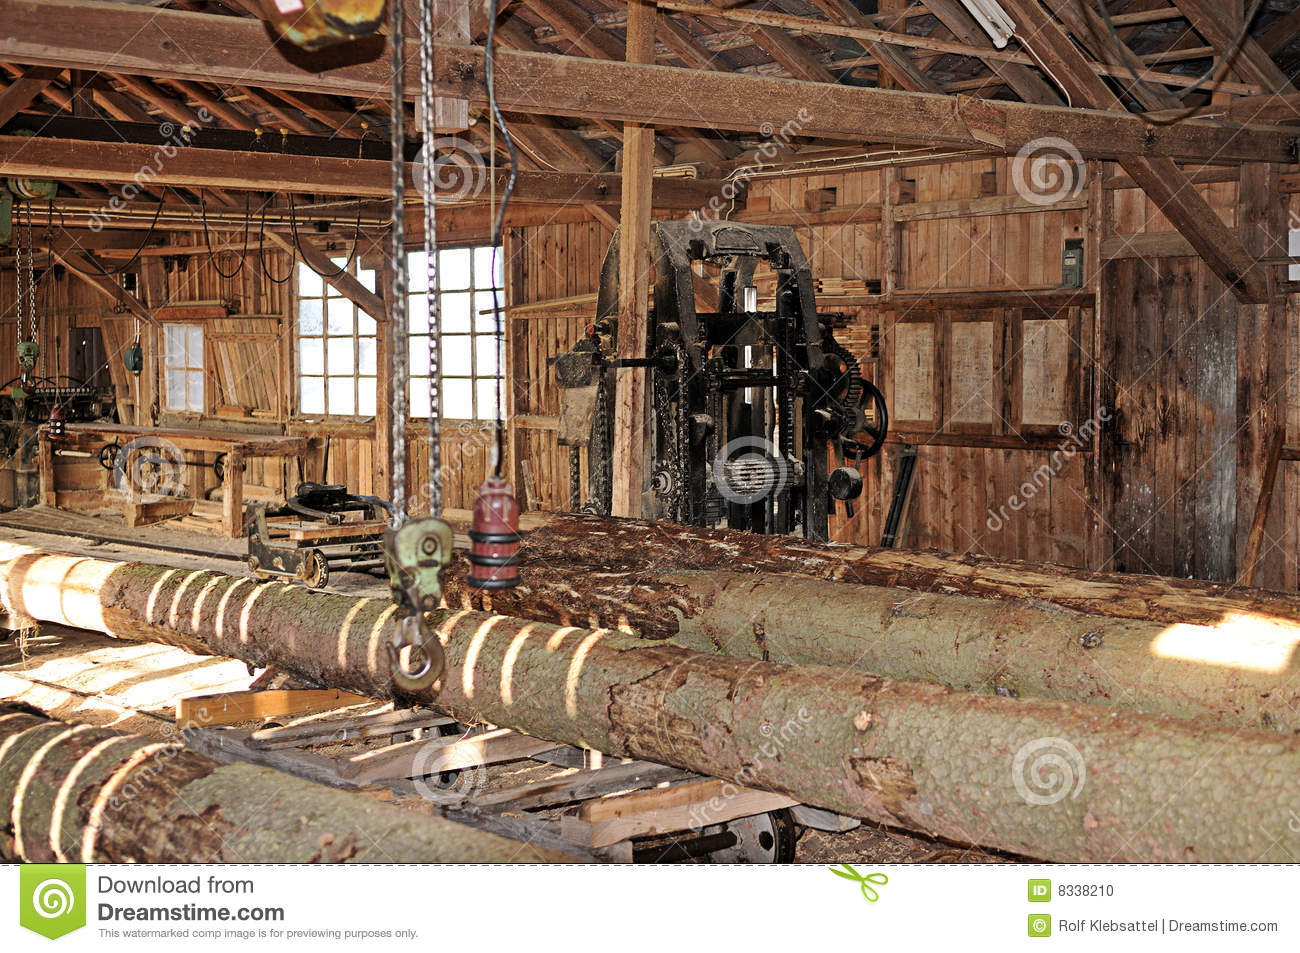 Old Saw Mill Stock Photo   Image  8338210